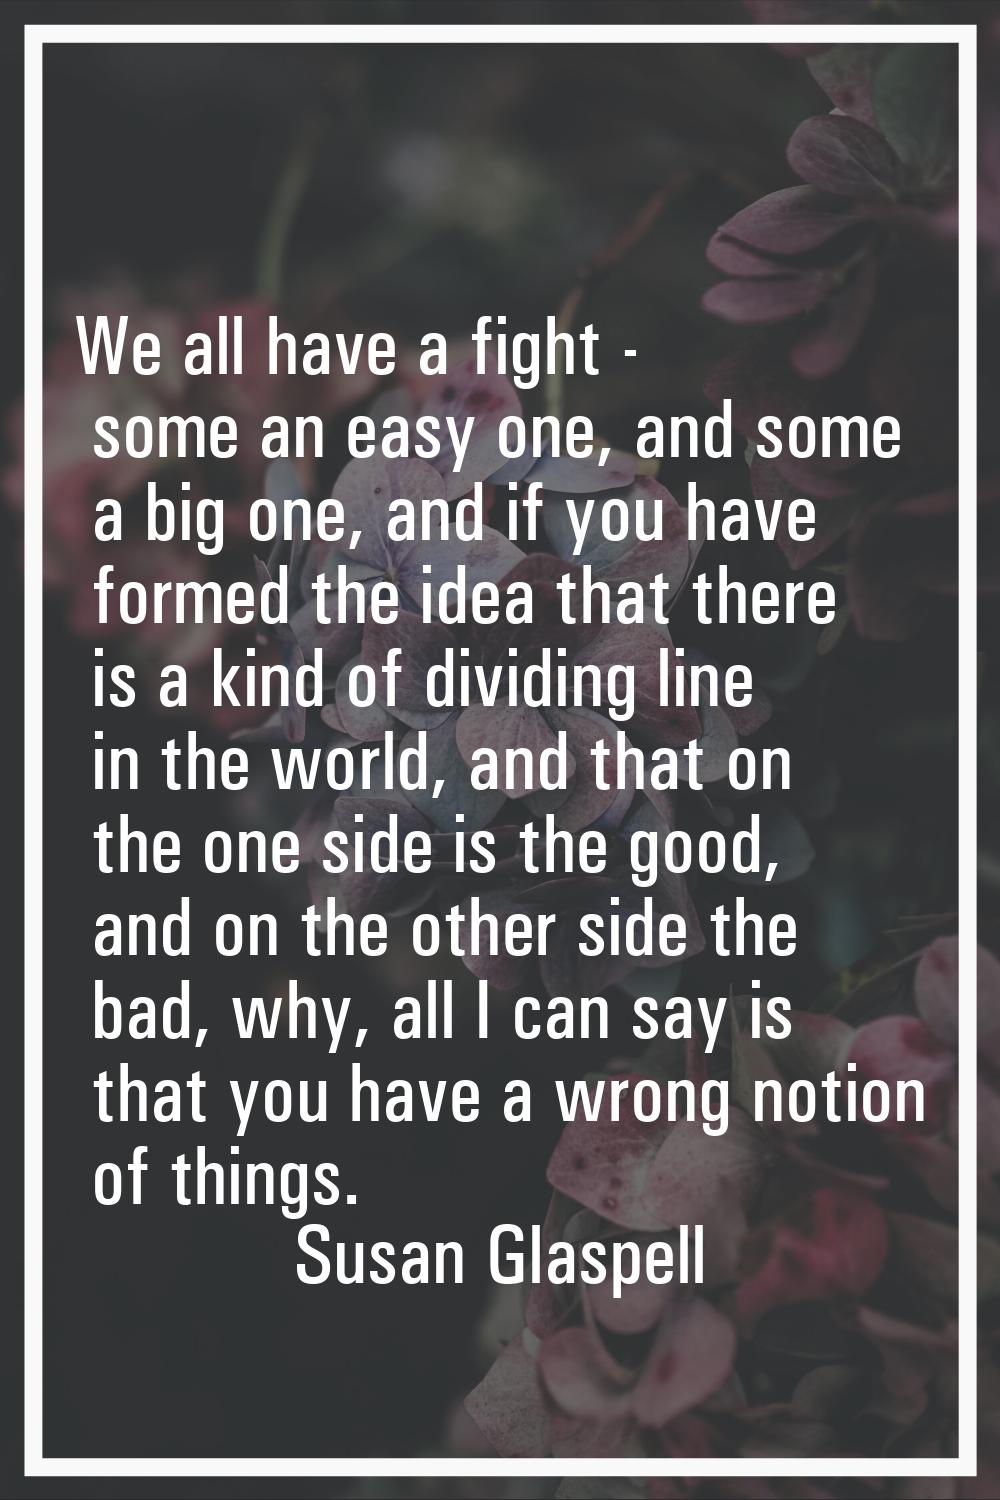 We all have a fight - some an easy one, and some a big one, and if you have formed the idea that th